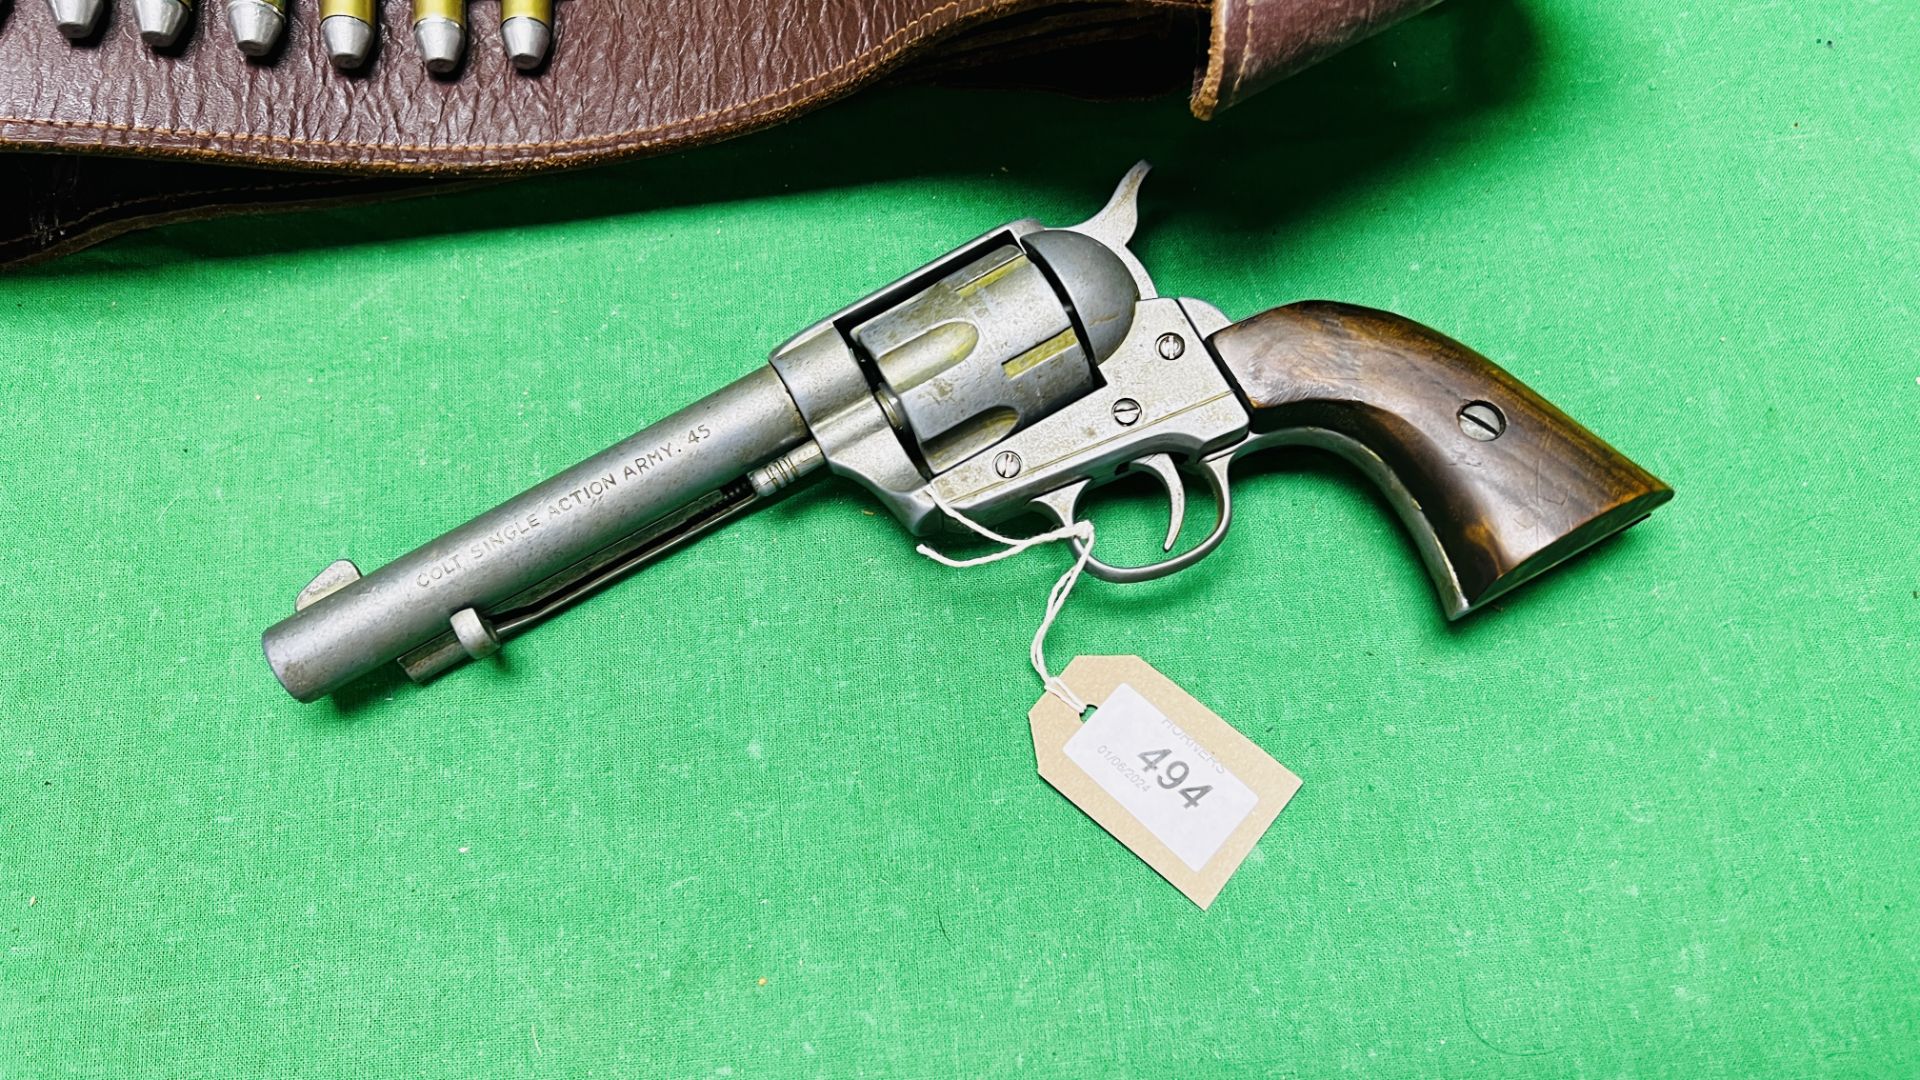 A WESTERN STYLE REPLICA REVOLVER WITH LEATHER HOLSTER AND ACCESSORIES - (ALL GUNS TO BE INSPECTED - Image 2 of 9